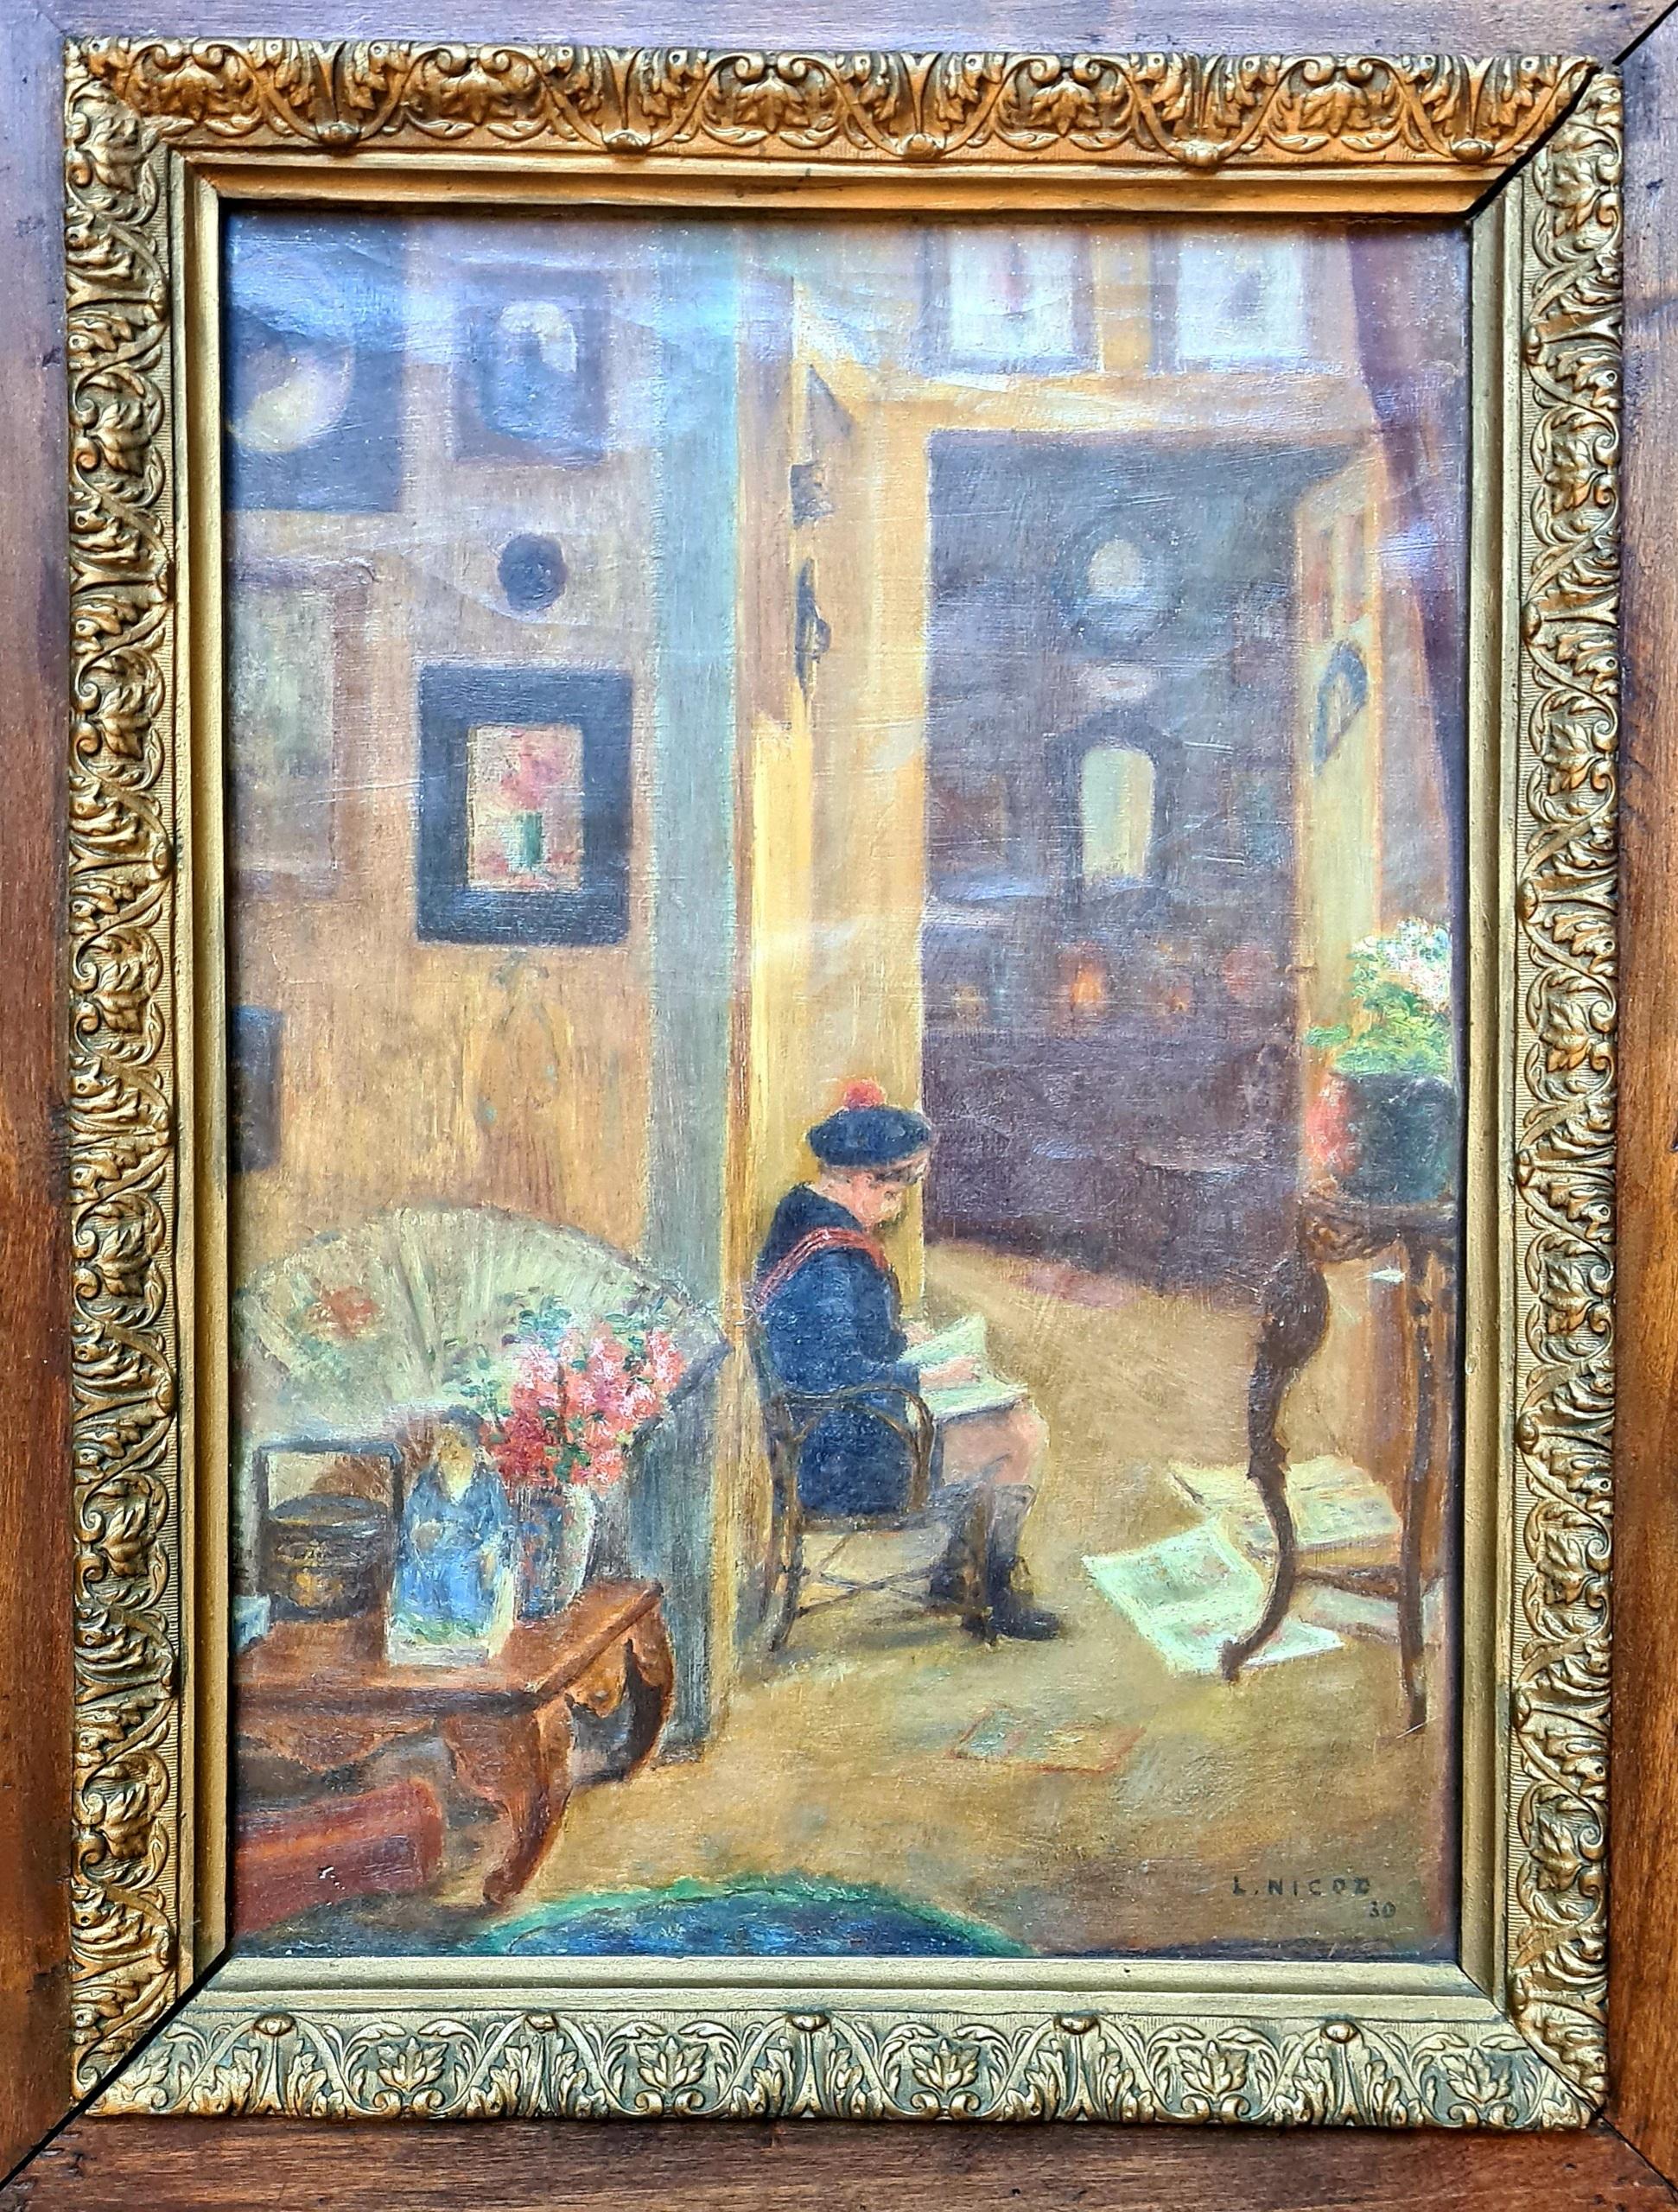 The Young Artist, Early 20th Century French Interior View, Chateau Vesoul - Painting by L Nicod